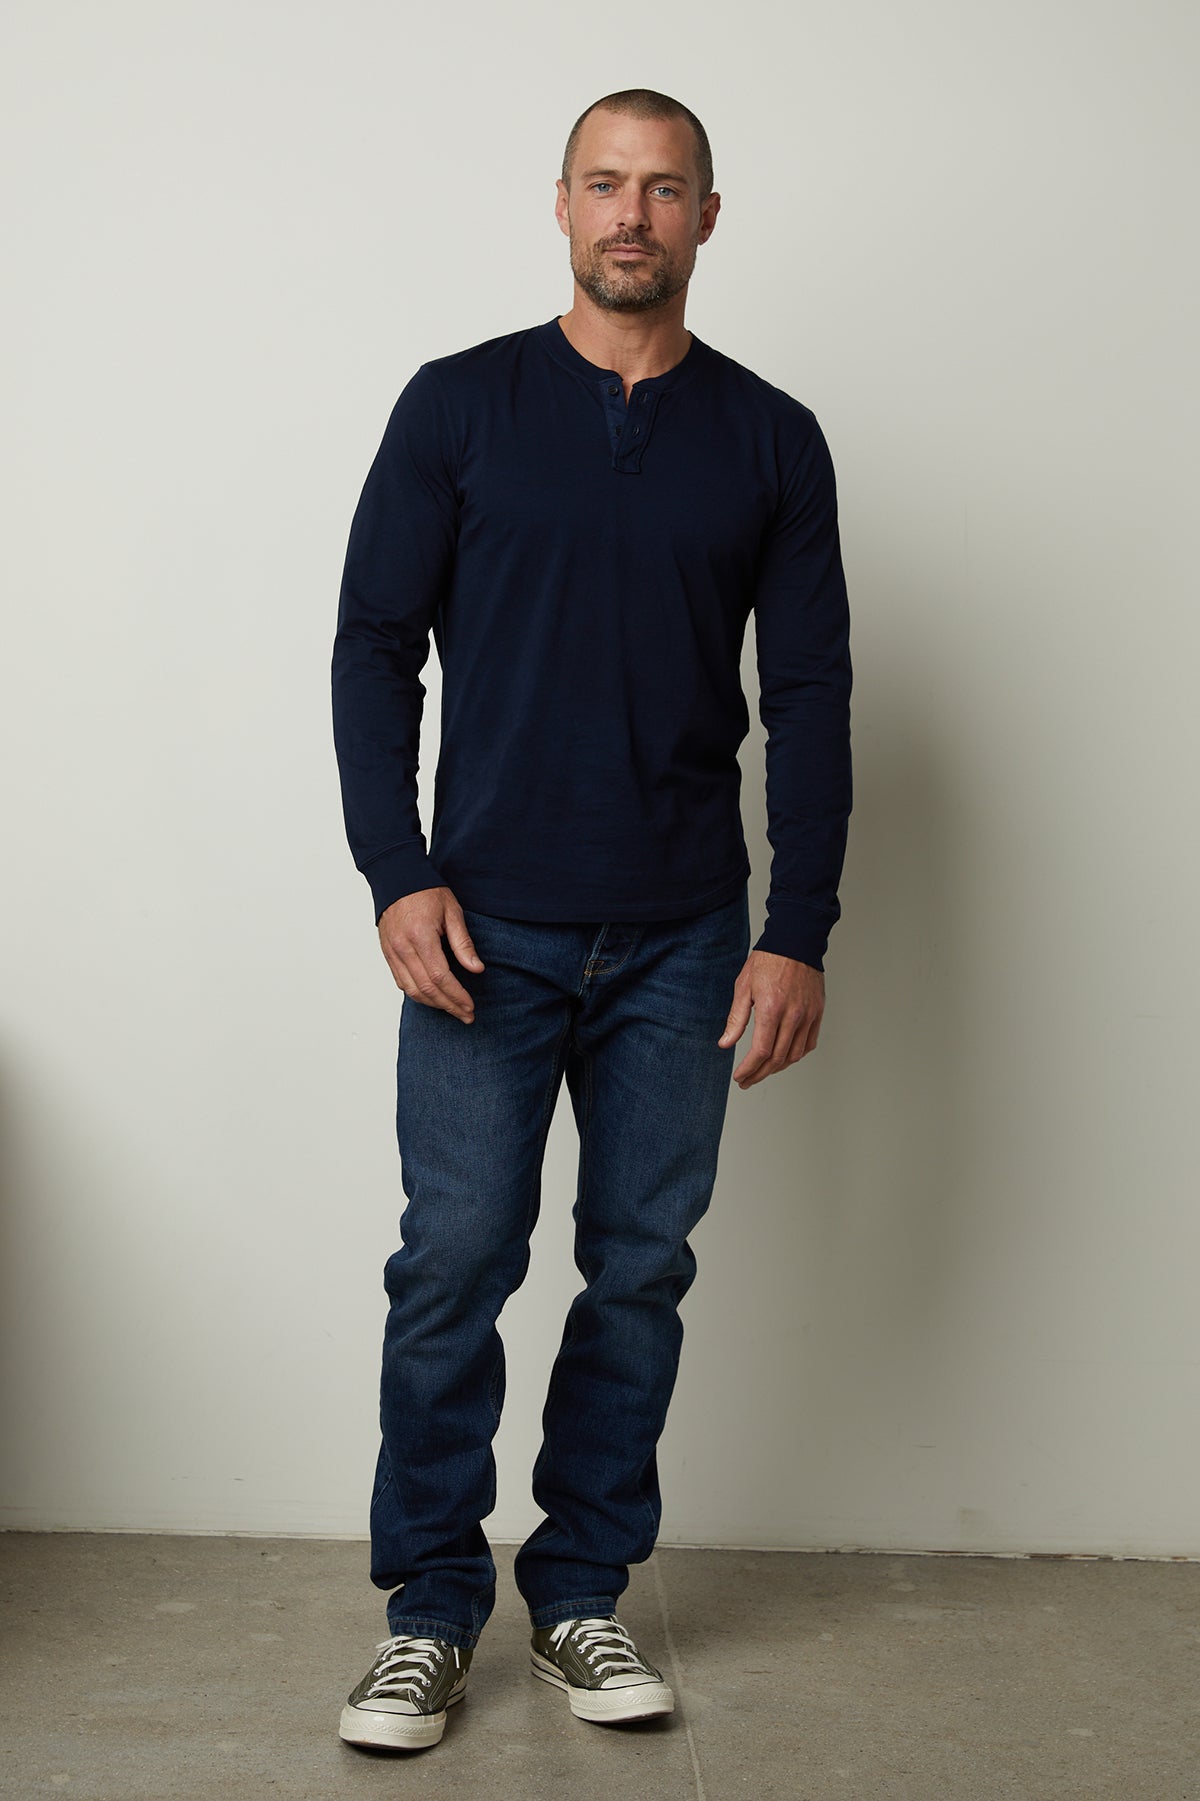   Braden Long Sleeve Henley in midnight front view with denim and sneakers 